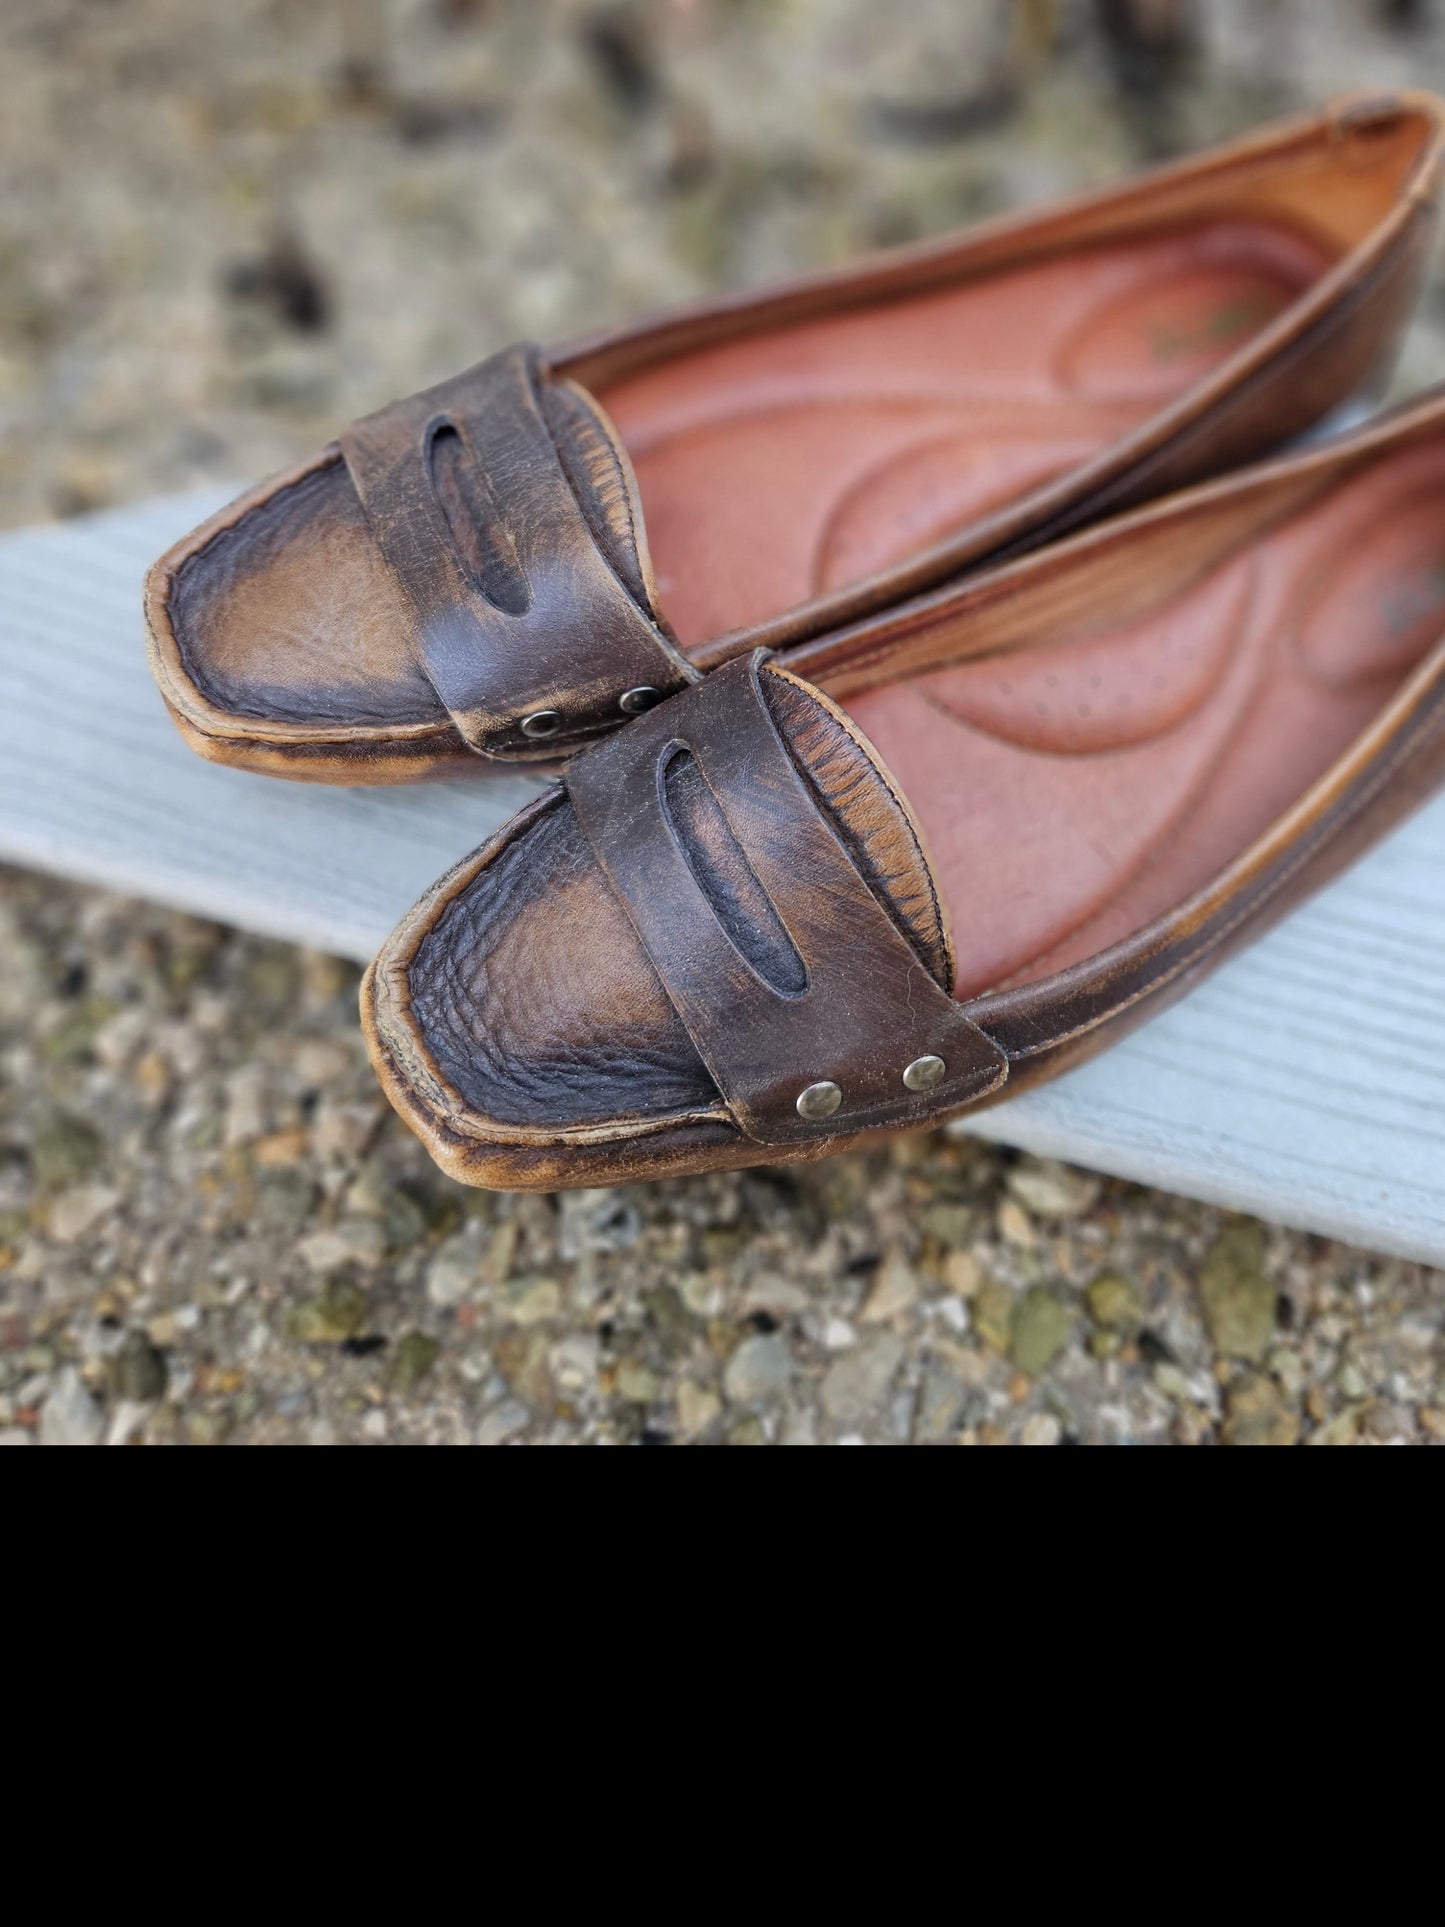 Women's BORN leather loafer flats - excellent condition Size 10